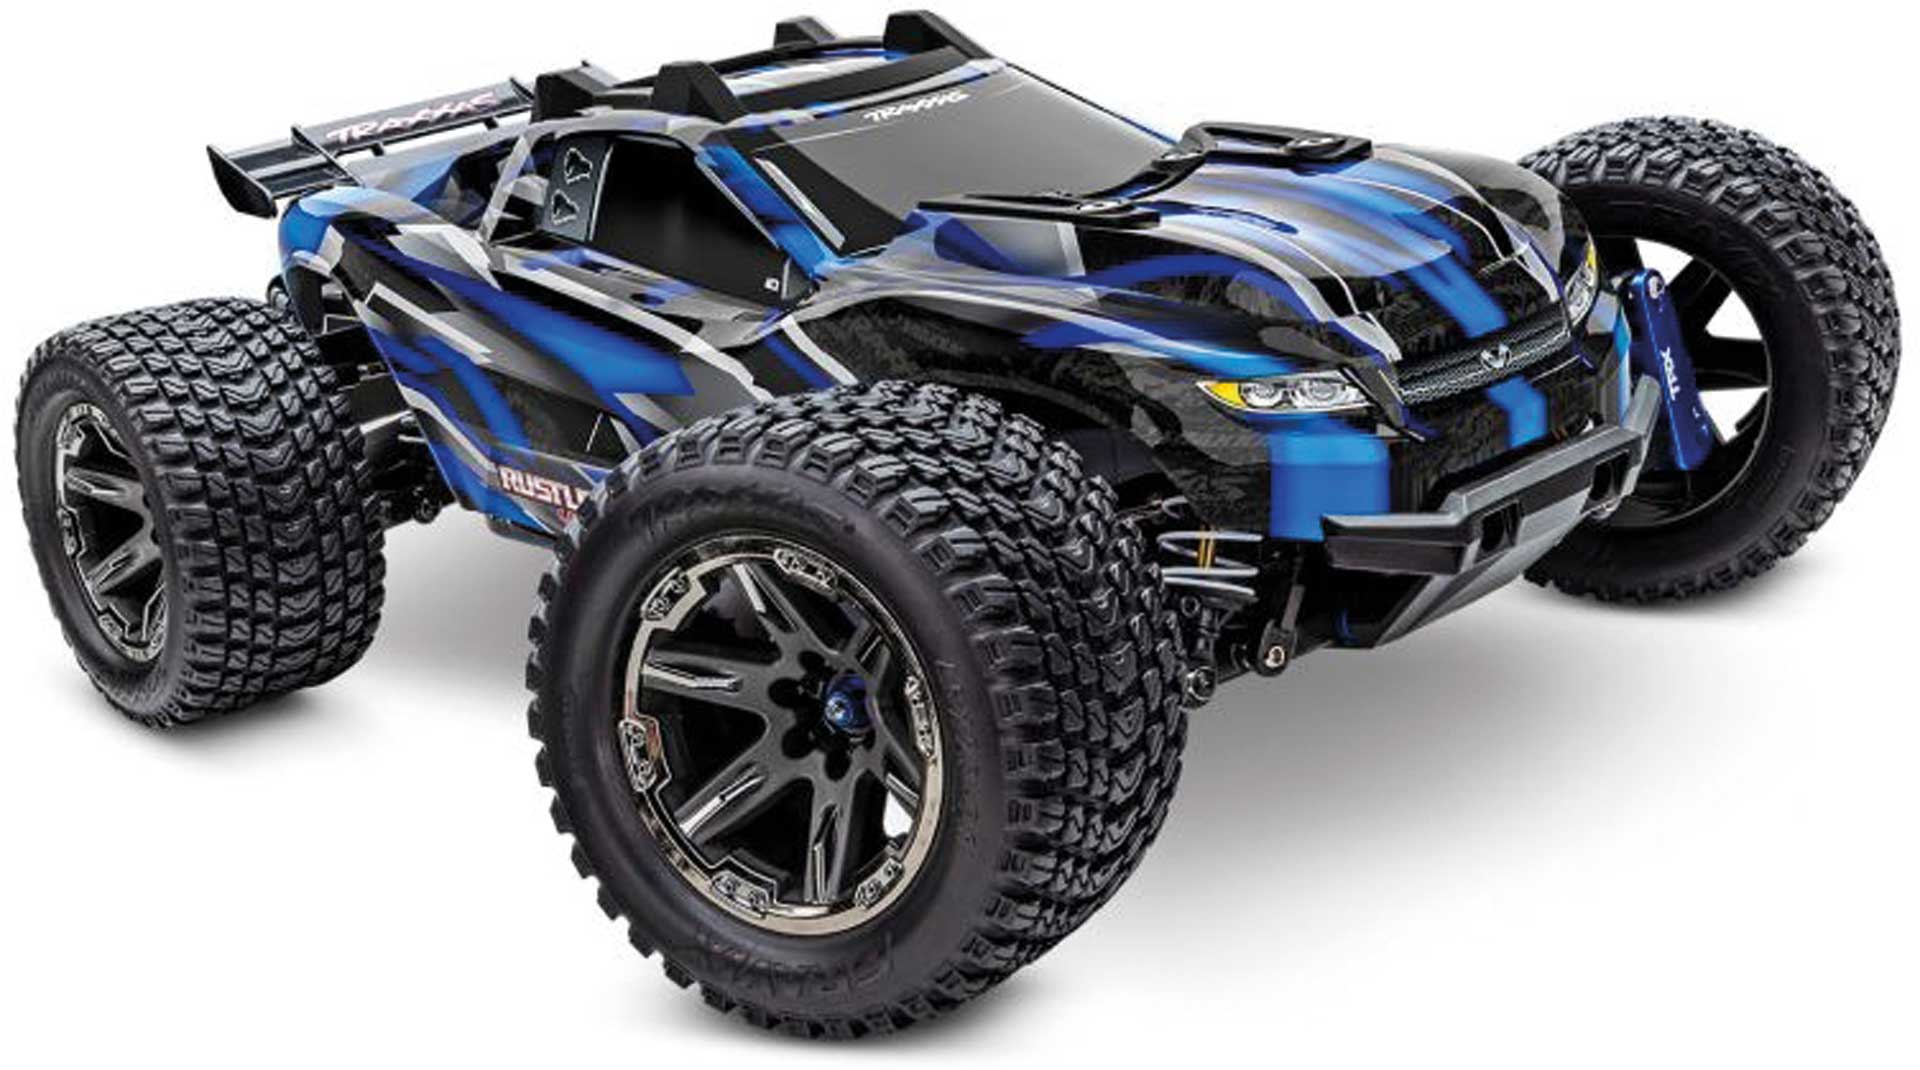 TRAXXAS RUSTLER 4X4 VXL ULTIMATE BLUE 1/10 STADIUM TRUCK RTR BRUSHLESS WITHOUT BATTERY AND CHARGER, WITH CLIPLESS